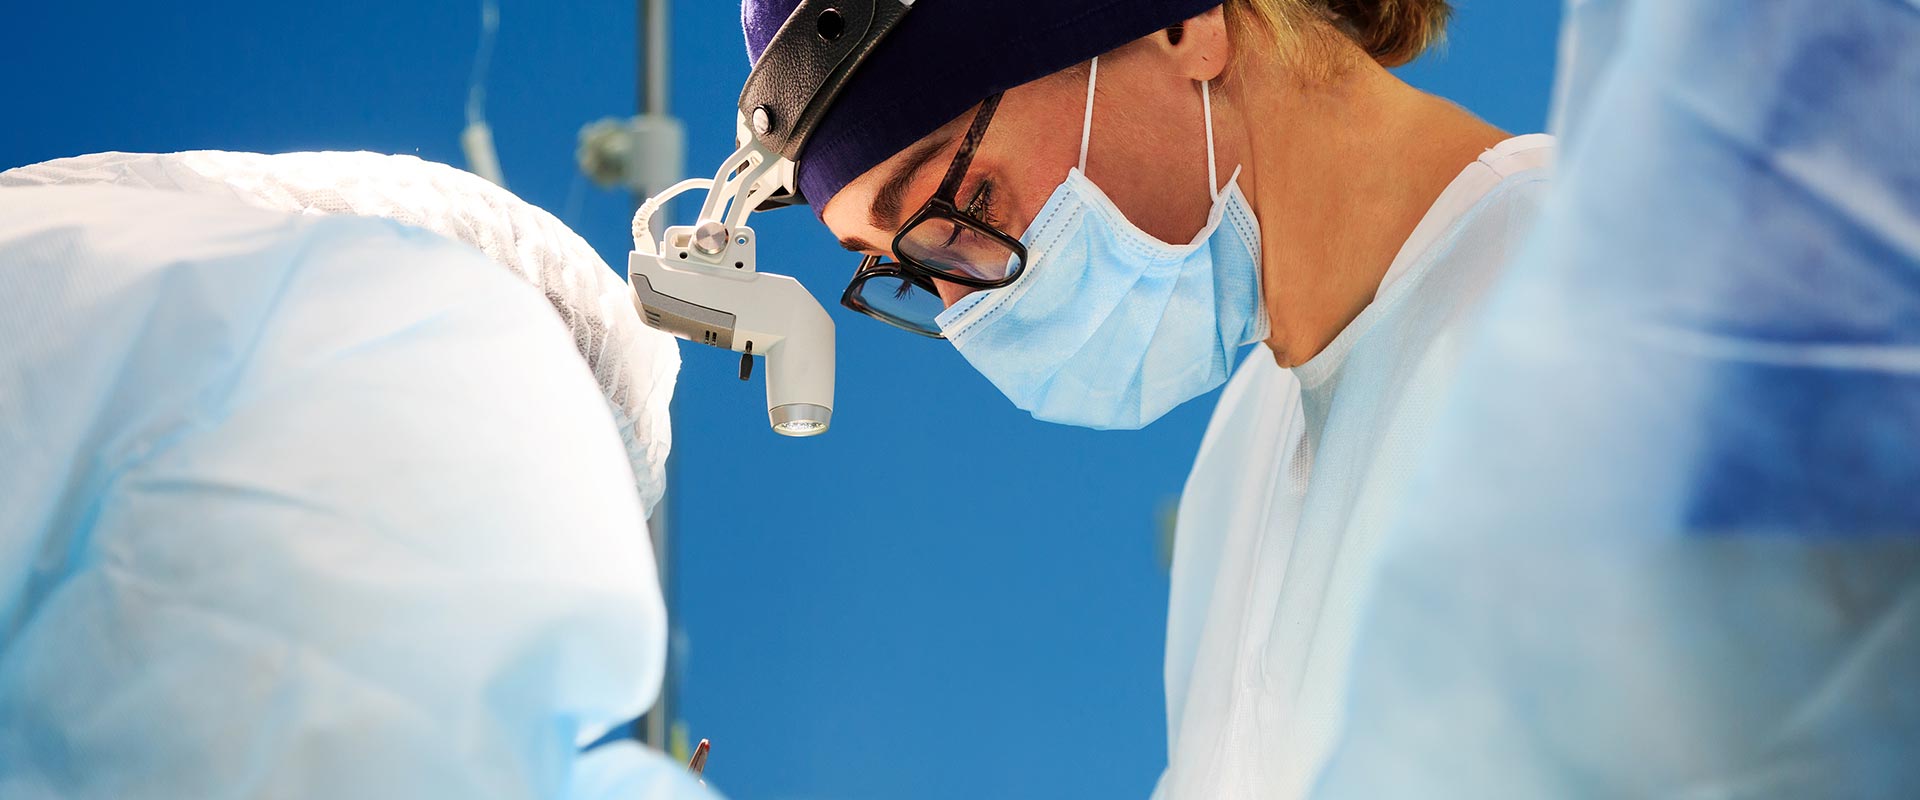 a woman surgeon performing an operation